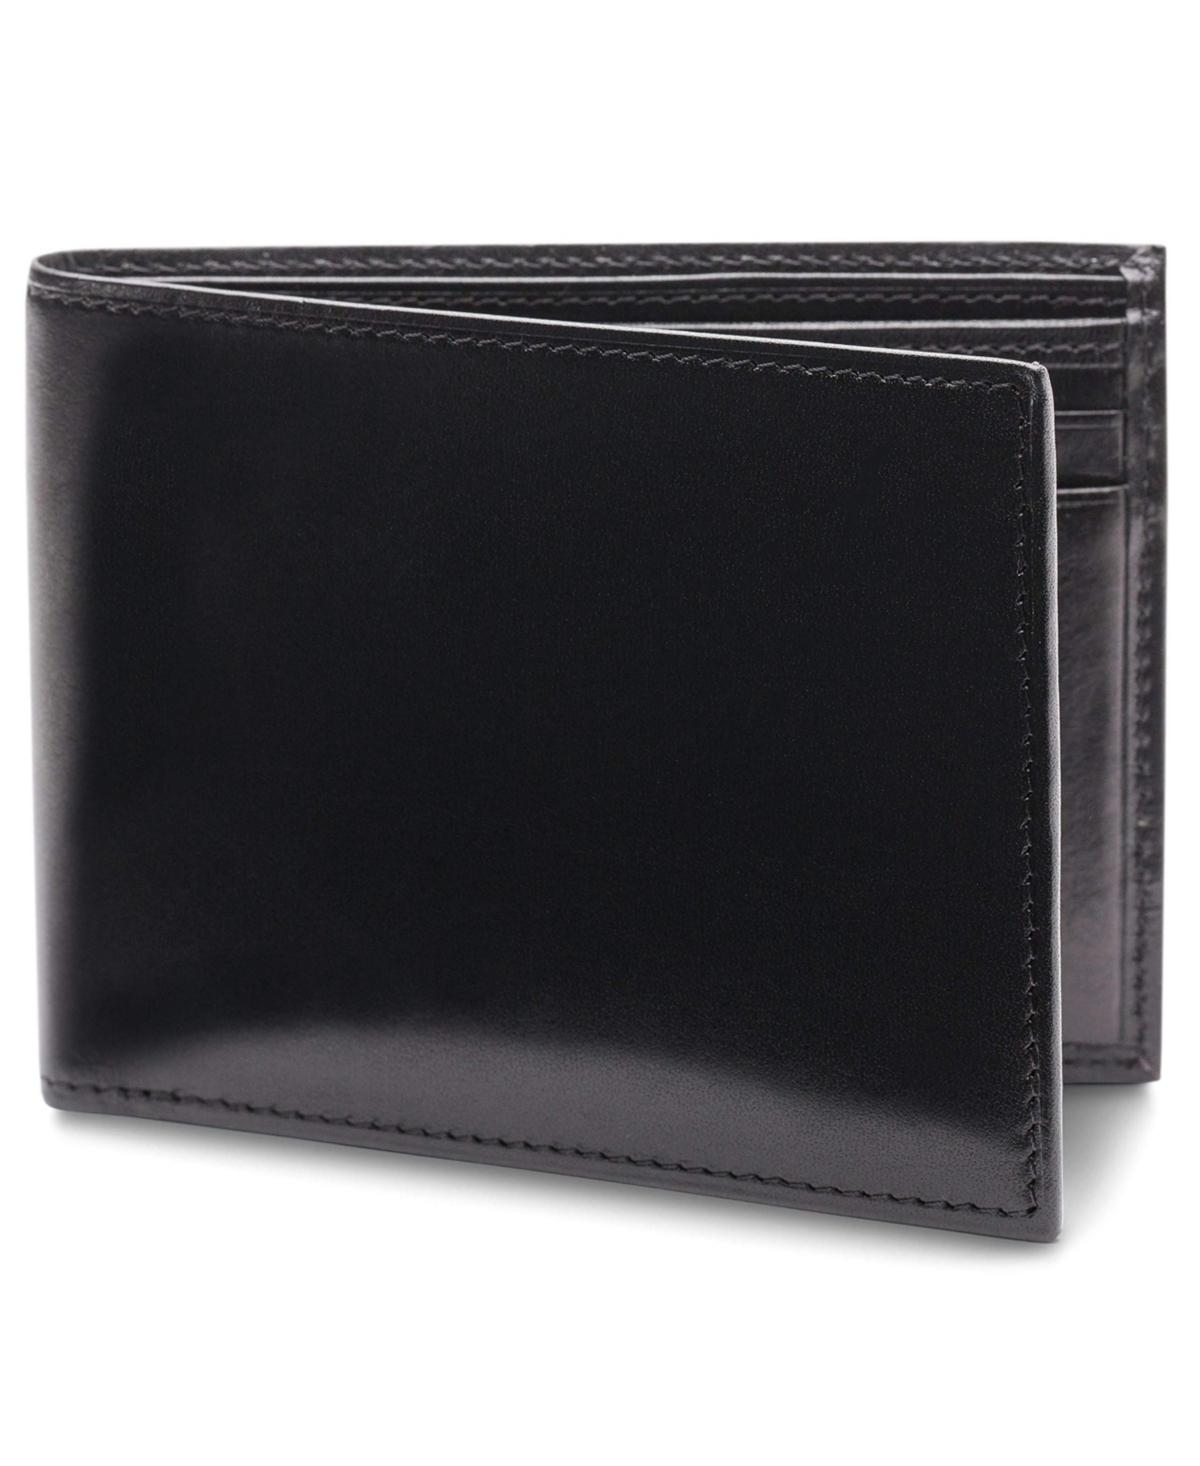 Men's Executive Wallet in Old Leather - Rfid - Black leather